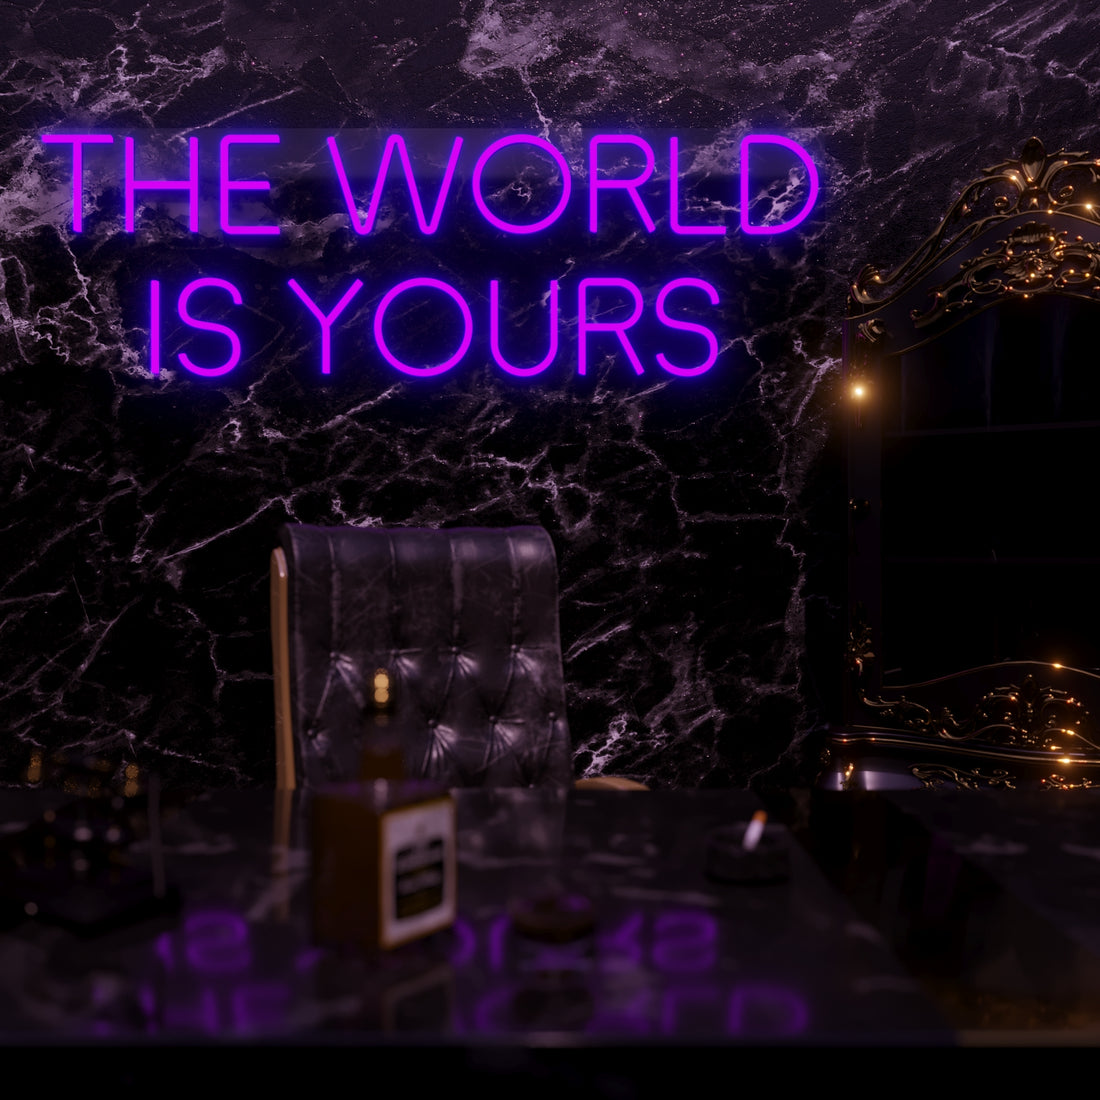 The World is Yours